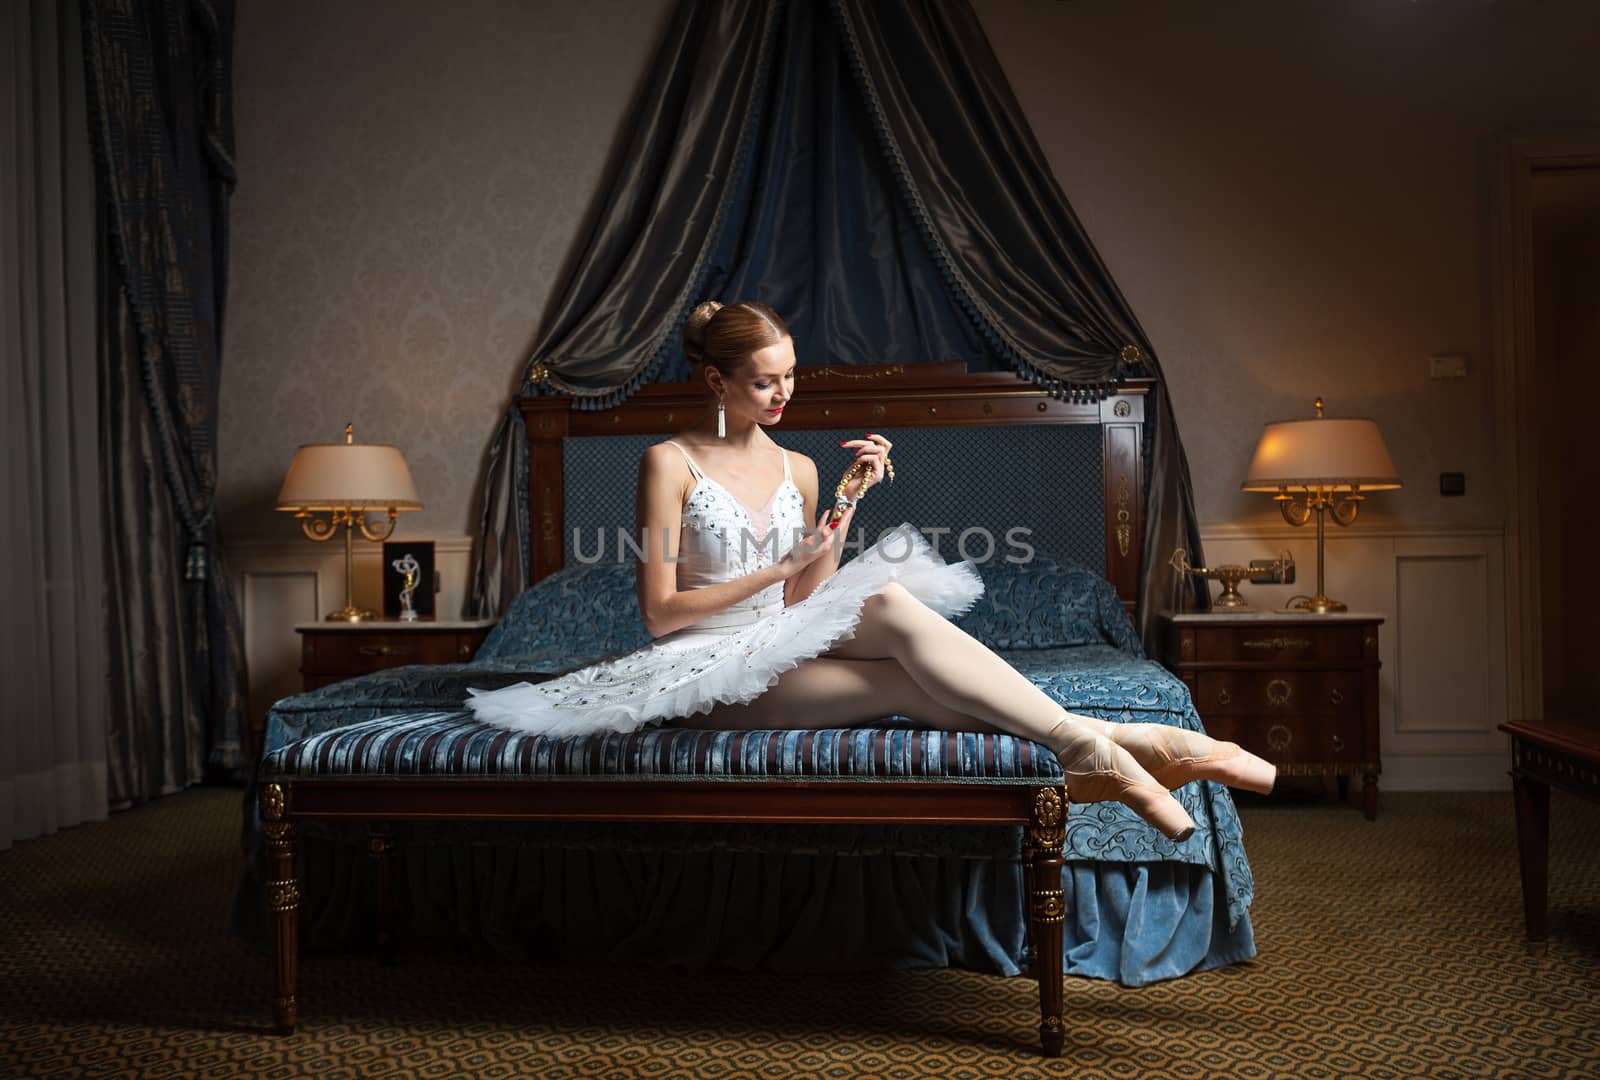 Ballet dancer in luxury bedroom and holding pearl necklace